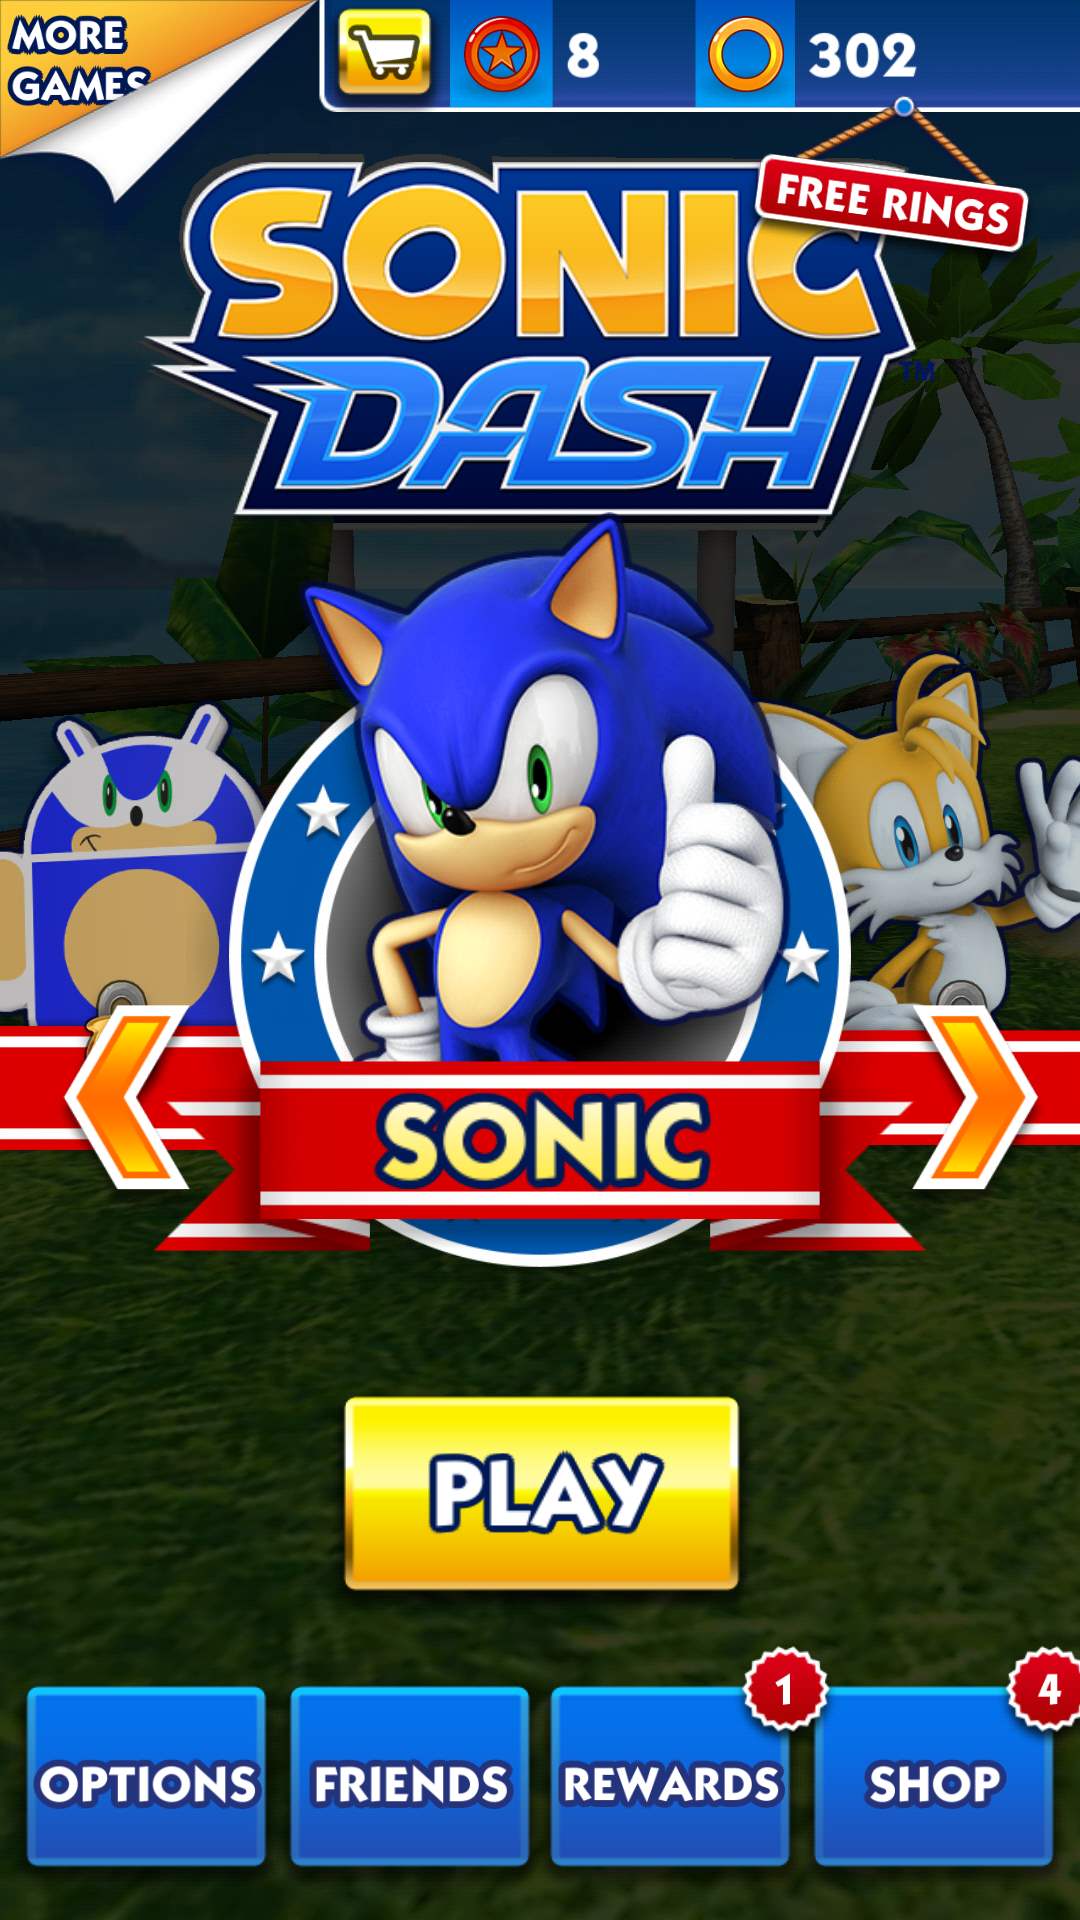 Sonic dash game to play free